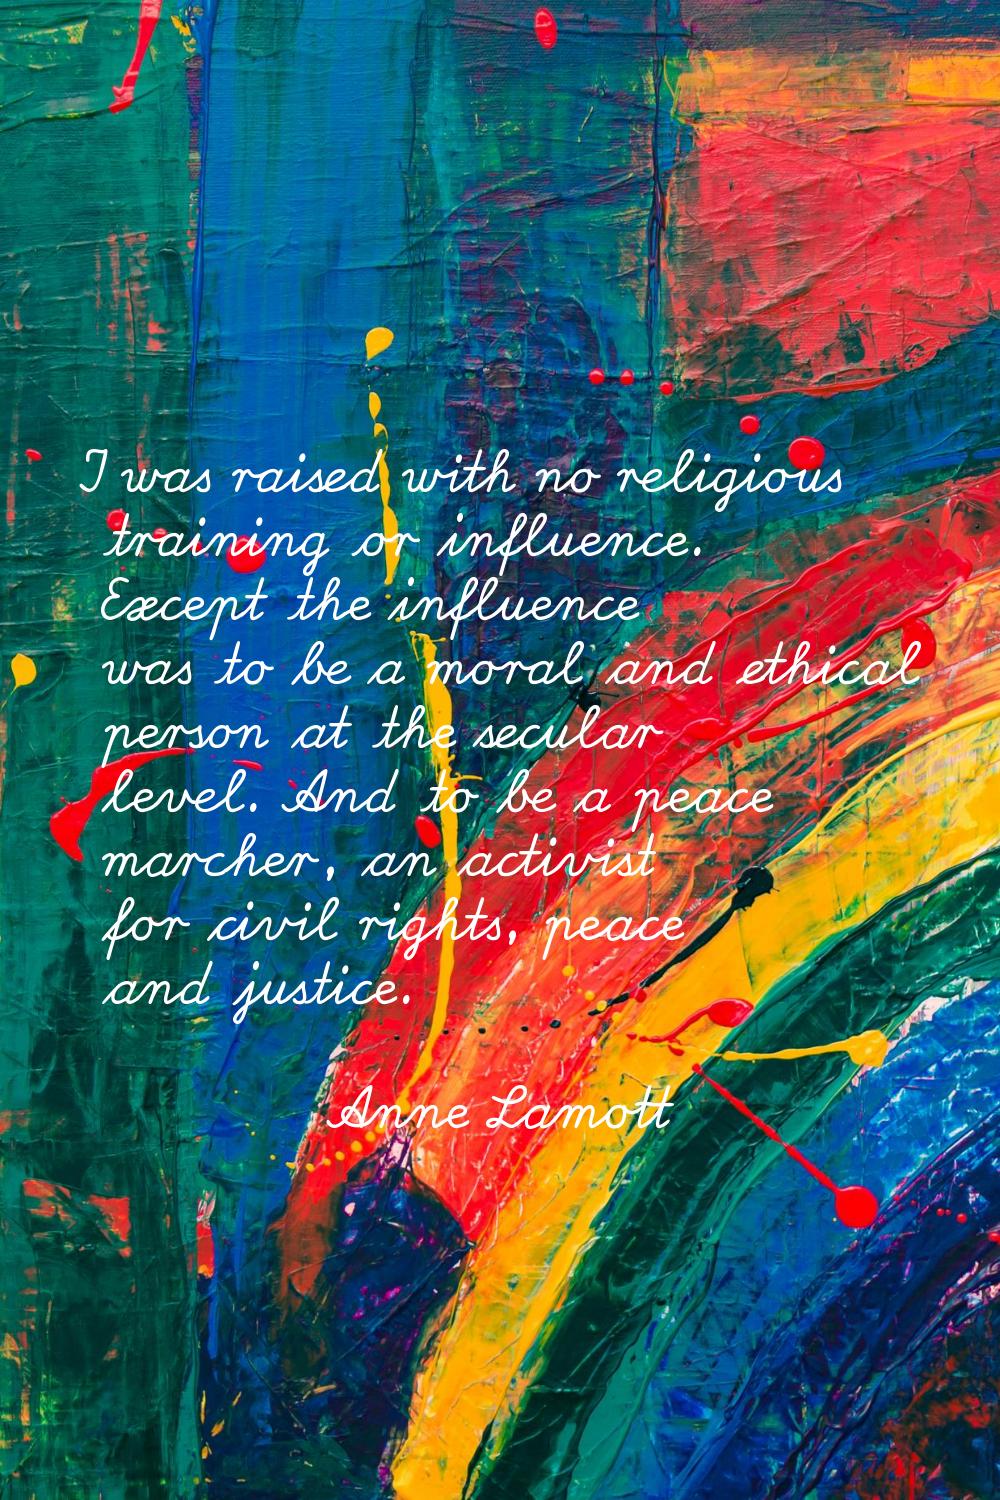 I was raised with no religious training or influence. Except the influence was to be a moral and et